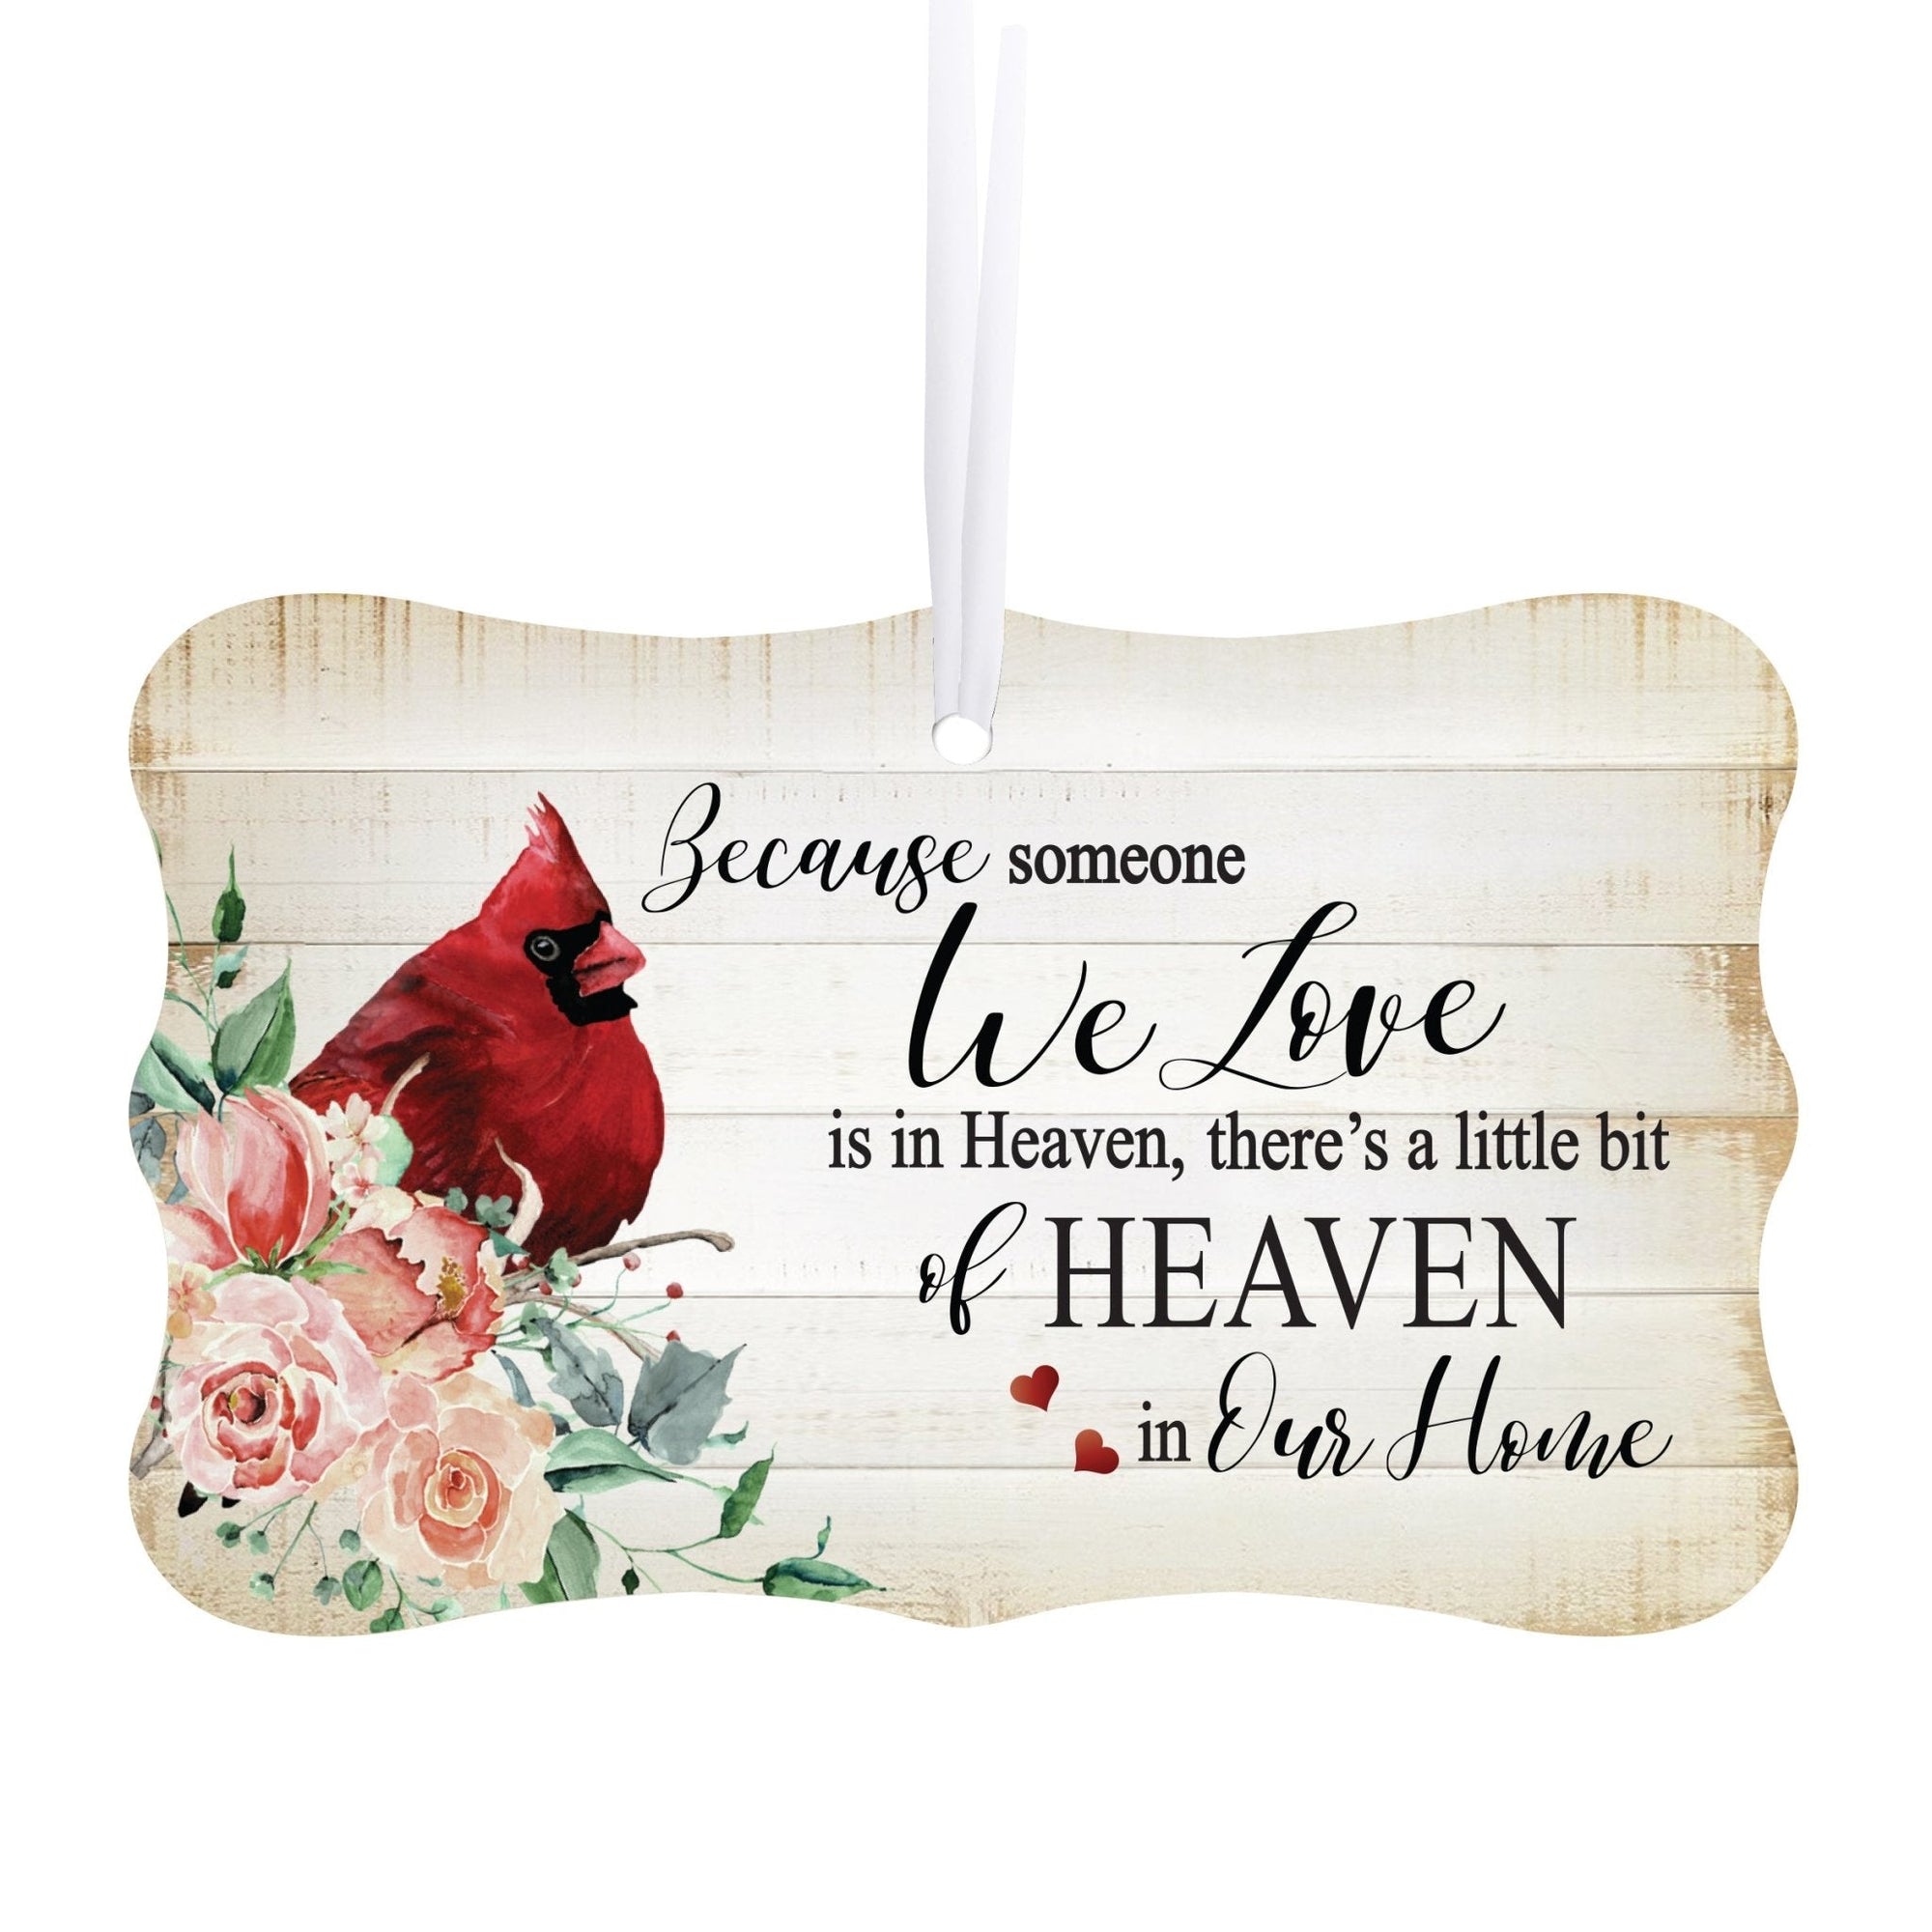 Scalloped ornament signs with heartfelt memorial messages - a beautiful way to honor the memory of a loved one.